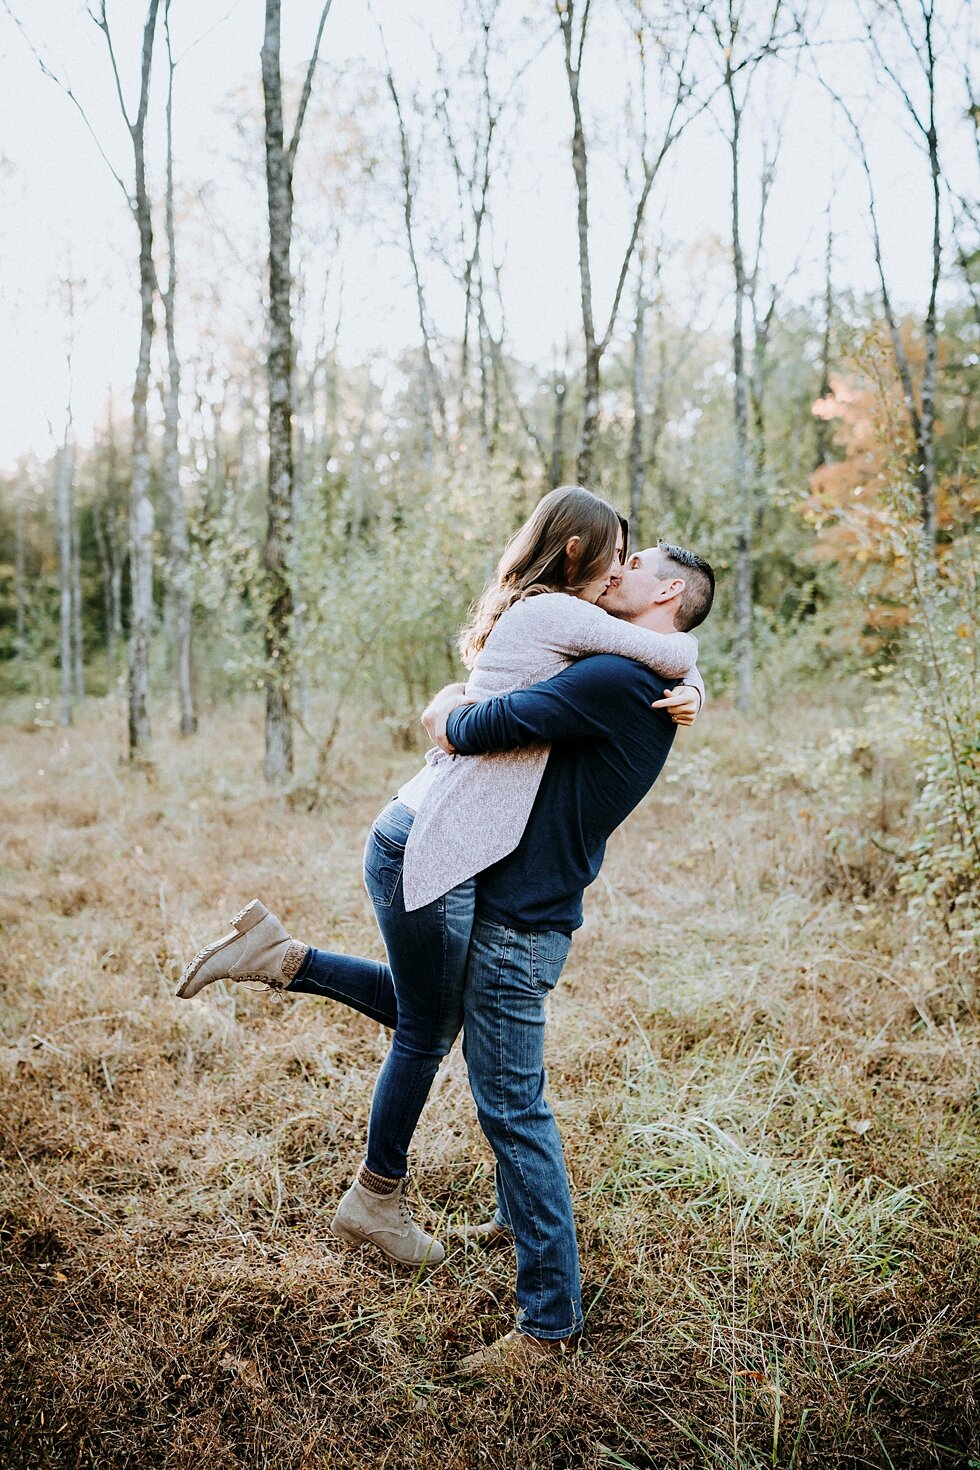  There is nothing like the kiss between an excited bride to be and her future groom #engagementgoals #engagementphotographer #engaged #outdoorengagement #kentuckyphotographer #indianaphotographer #louisvillephotographer #engagementphotos #savethedate